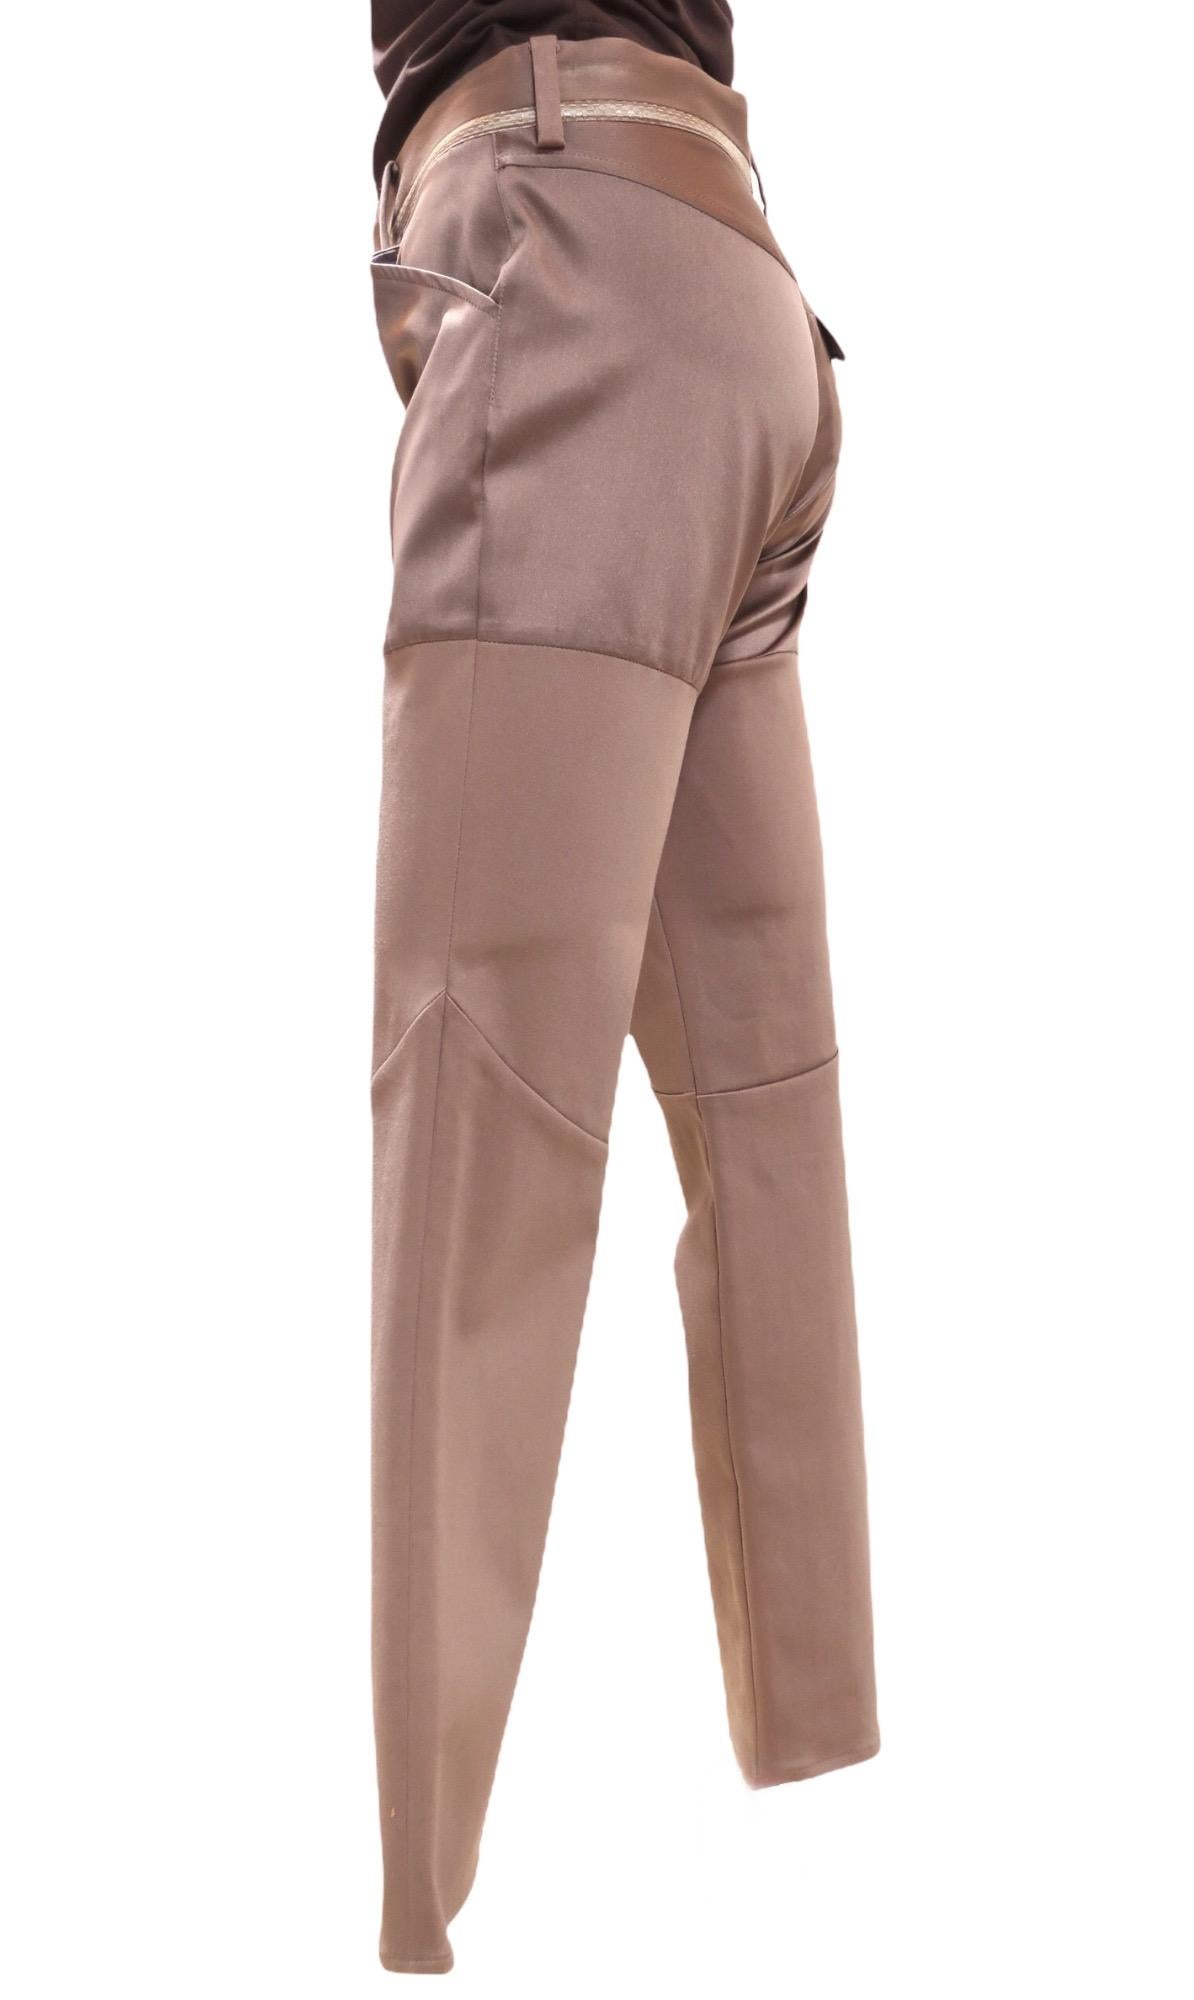 These sensational straight pants from vintage Undercover shine in a warm shade of grey. With gorgeous details including contrasting textured fabric around the waist and on the flap of the back pocket, as well as a sturdier stretch mid-leg fabric,